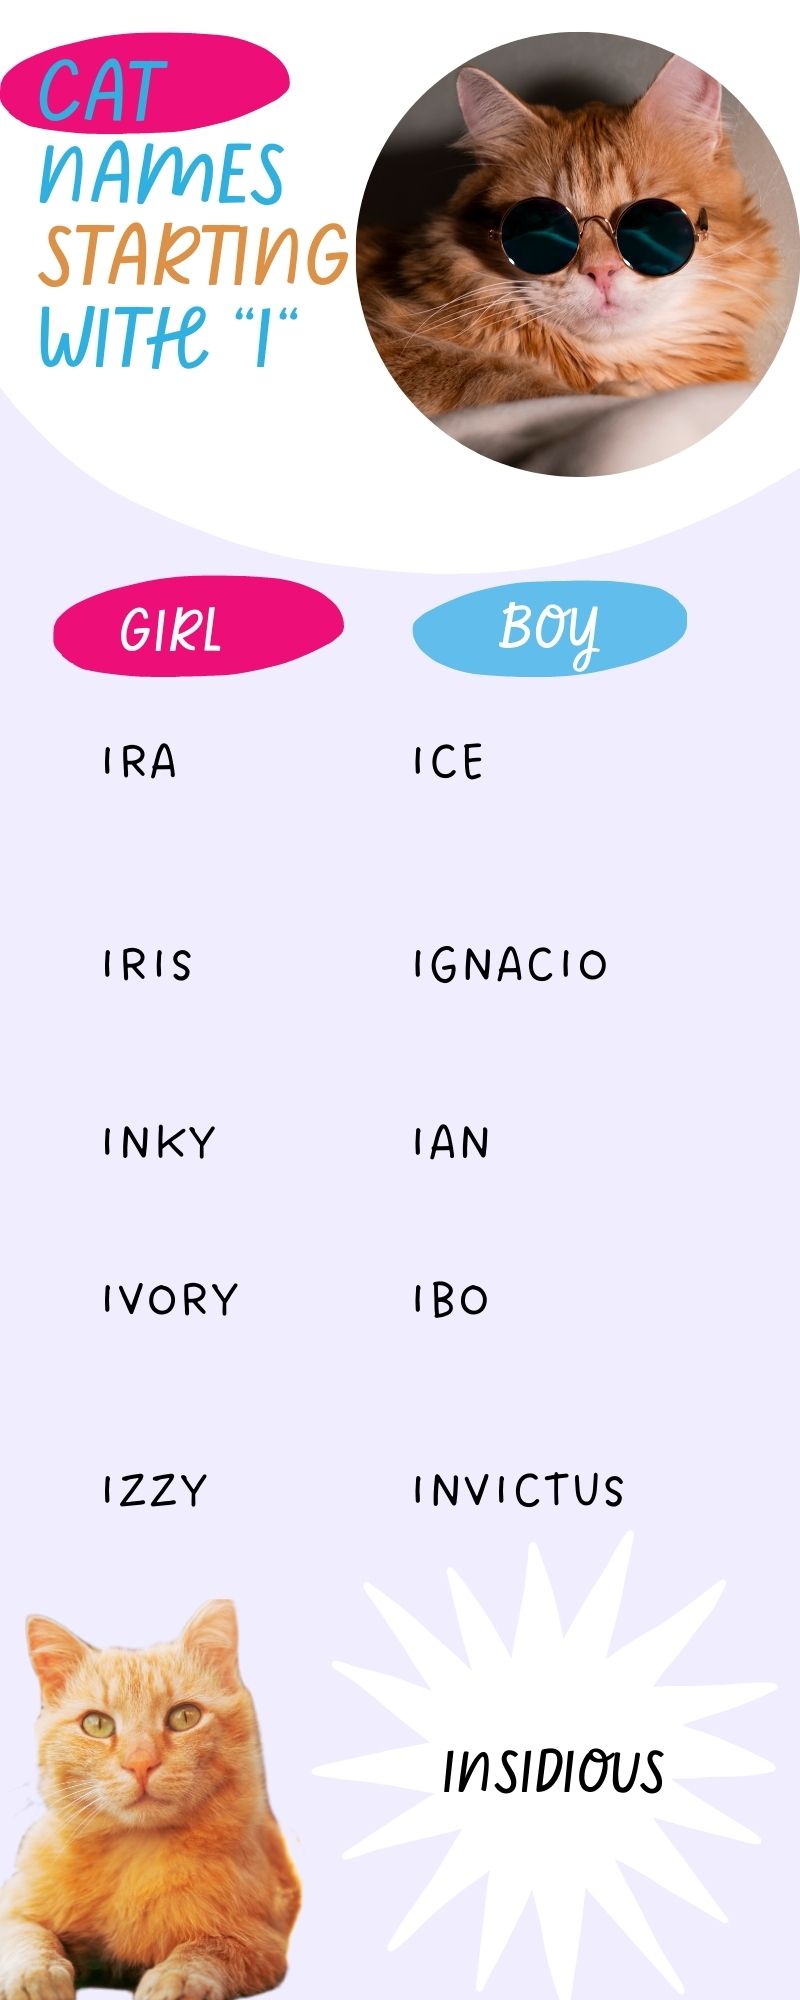 This infographic shows the 10 cat names starting with 'I'